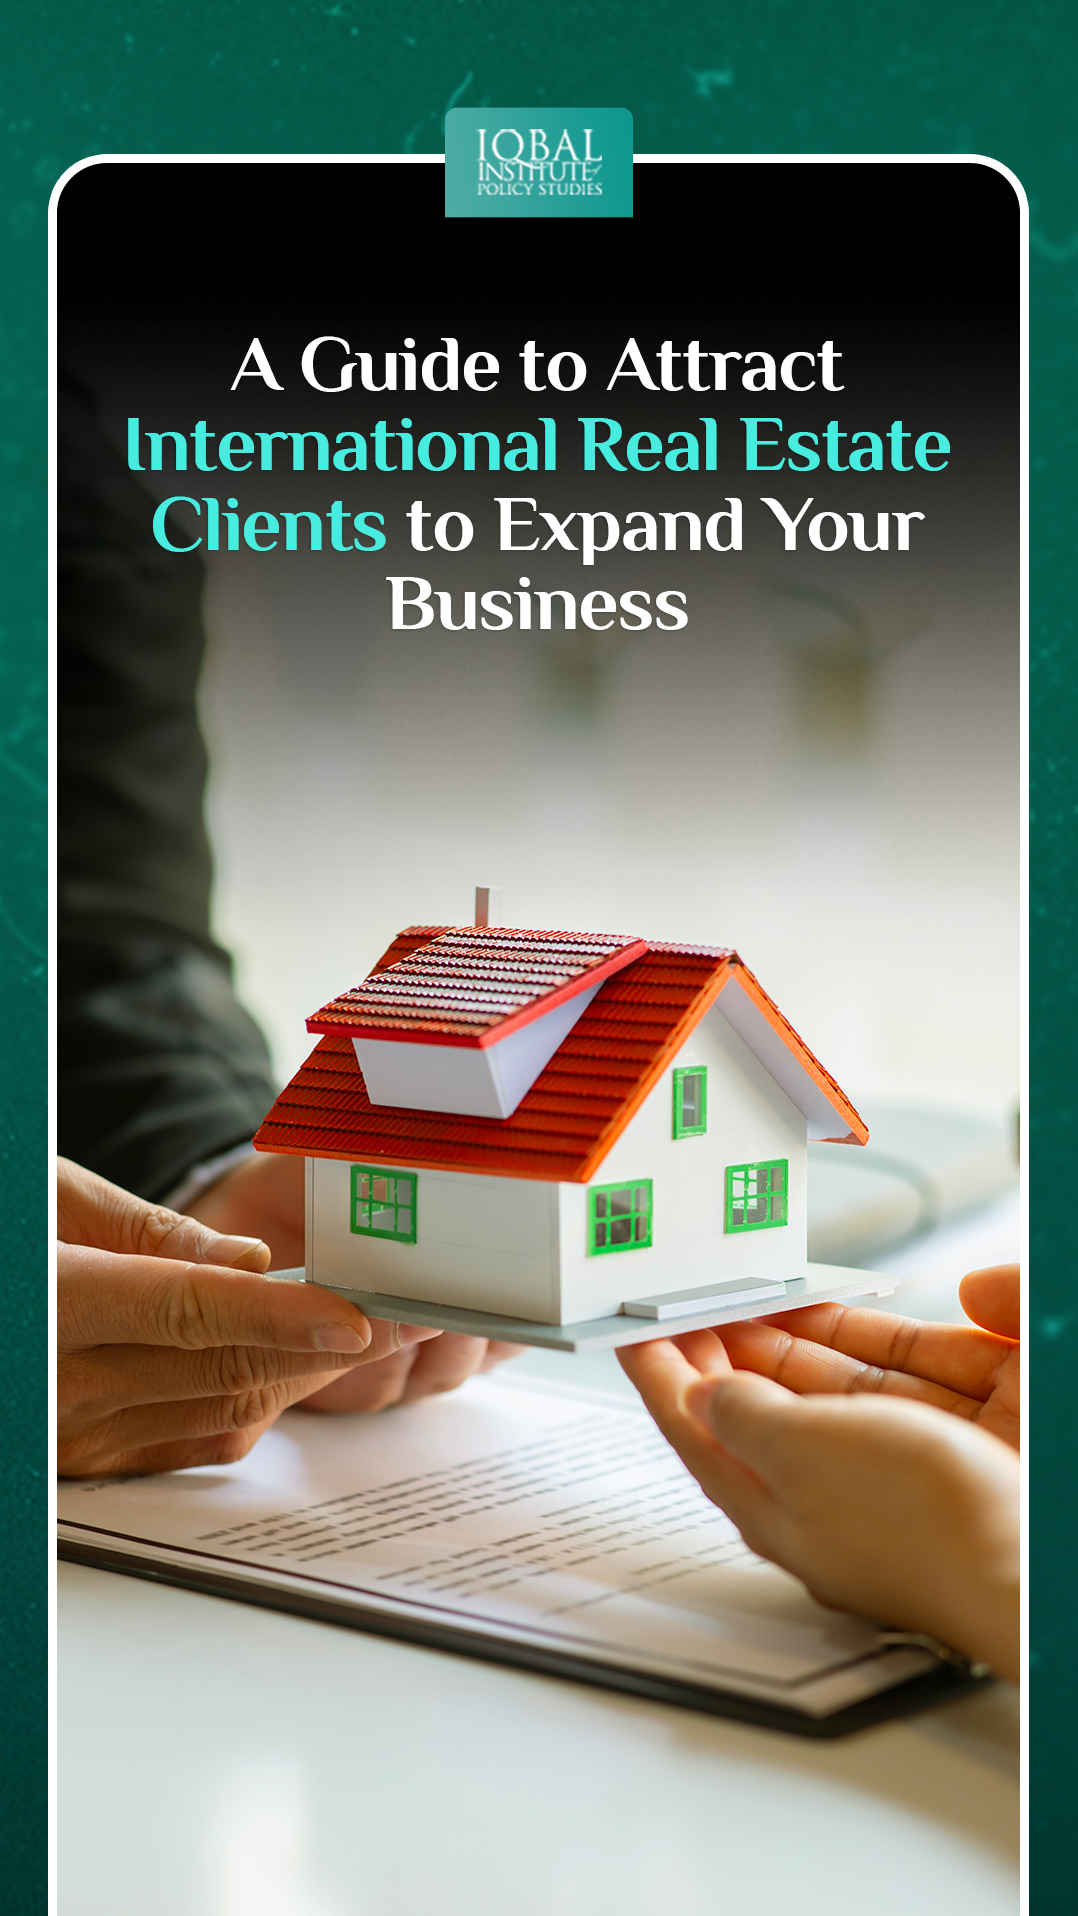 A Guide to Attract International Real Estate Clients to Expand Your Business